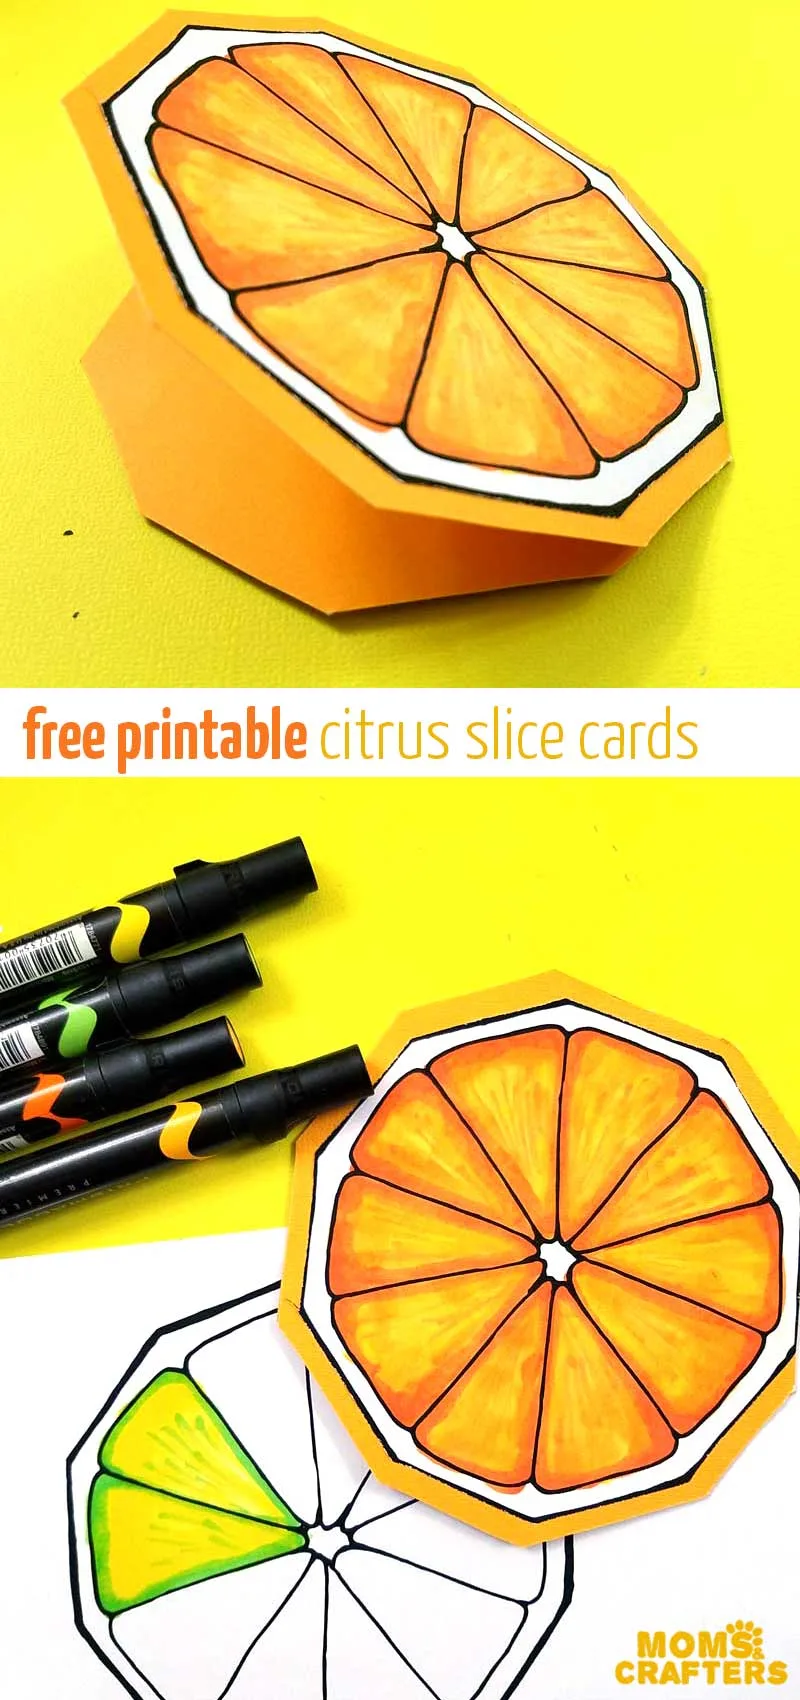 These citrus slice fruit cards are sooo cute - print the free printable and color it in this cool coloring page for kids, teens, tweens, and adults! This cool paper cardmaking craft is so simple and easy for beginners - perfect for Summer! #cardmaking #citrus #momsandcrafters